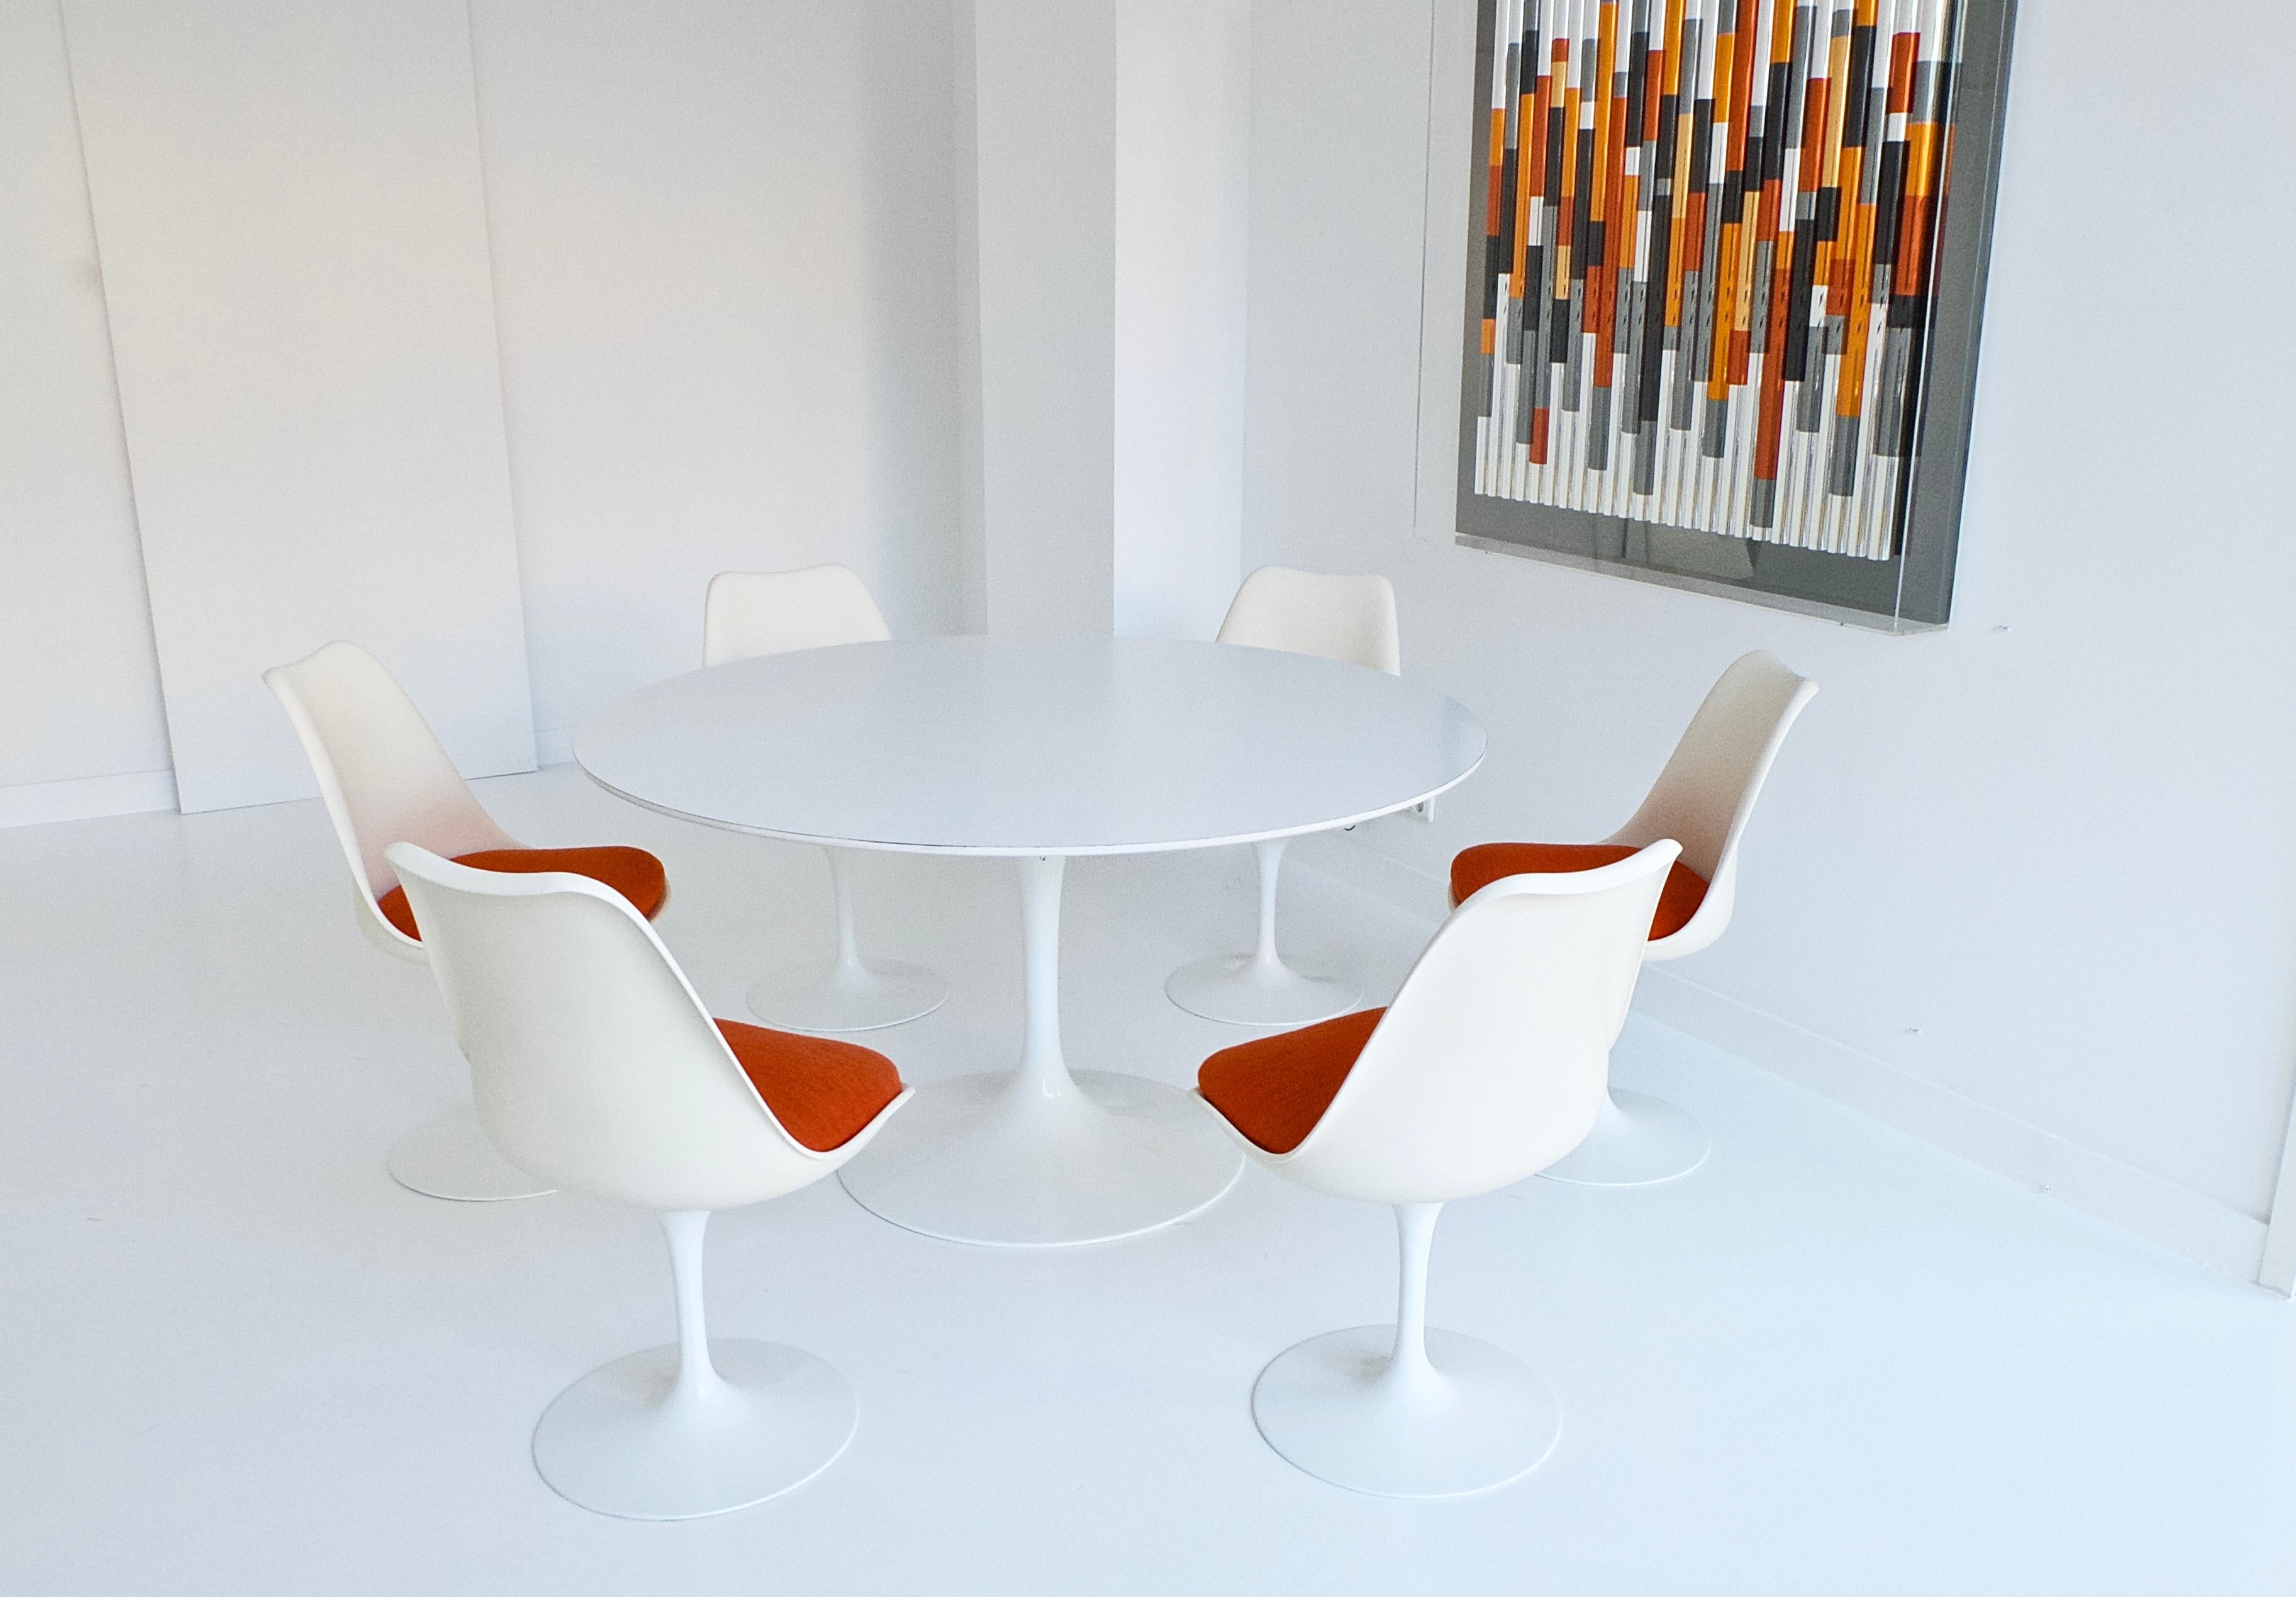 This dining set, consisting of a round dining table and 6 side chairs, dates back to the 1970s and is in very good vintage condition.

The white color of the plastic seat shells differs slightly from the powder-coated cast aluminium legs, this is